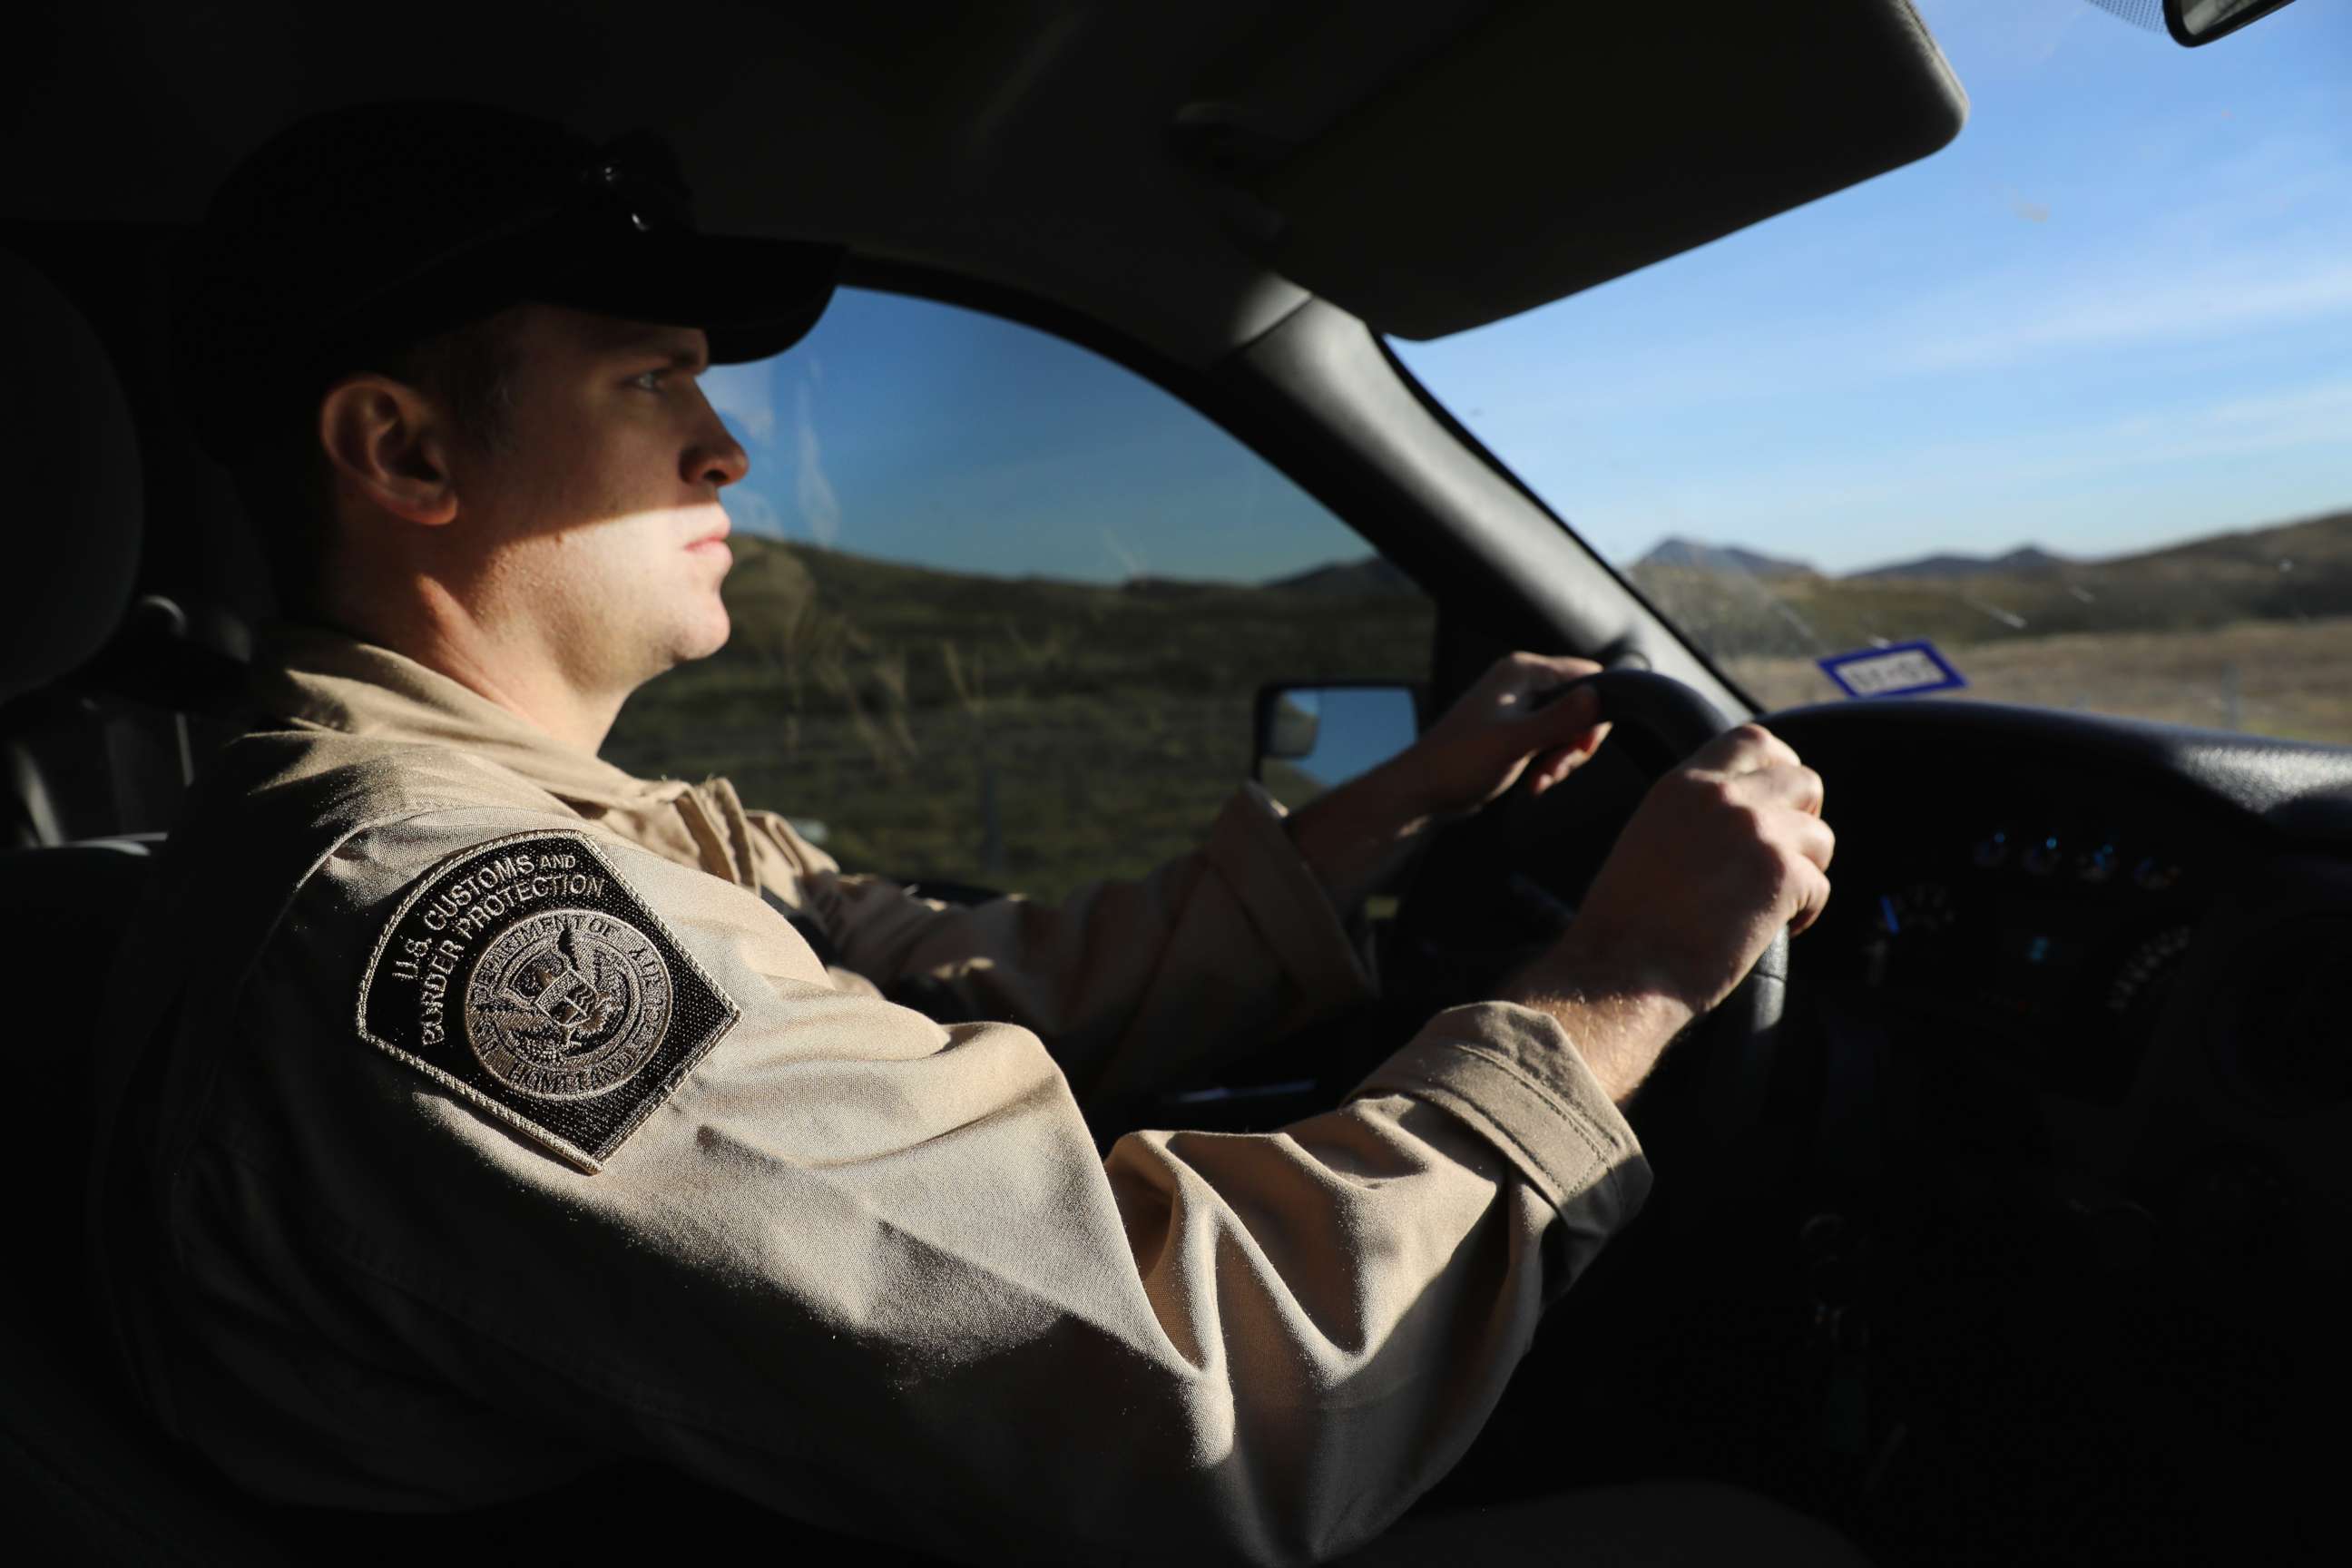 PHOTO: A Customs and Border Protection (CBP) agent drives along Interstate 10, on Nov. 22, 2017, in Van Horn, Texas.